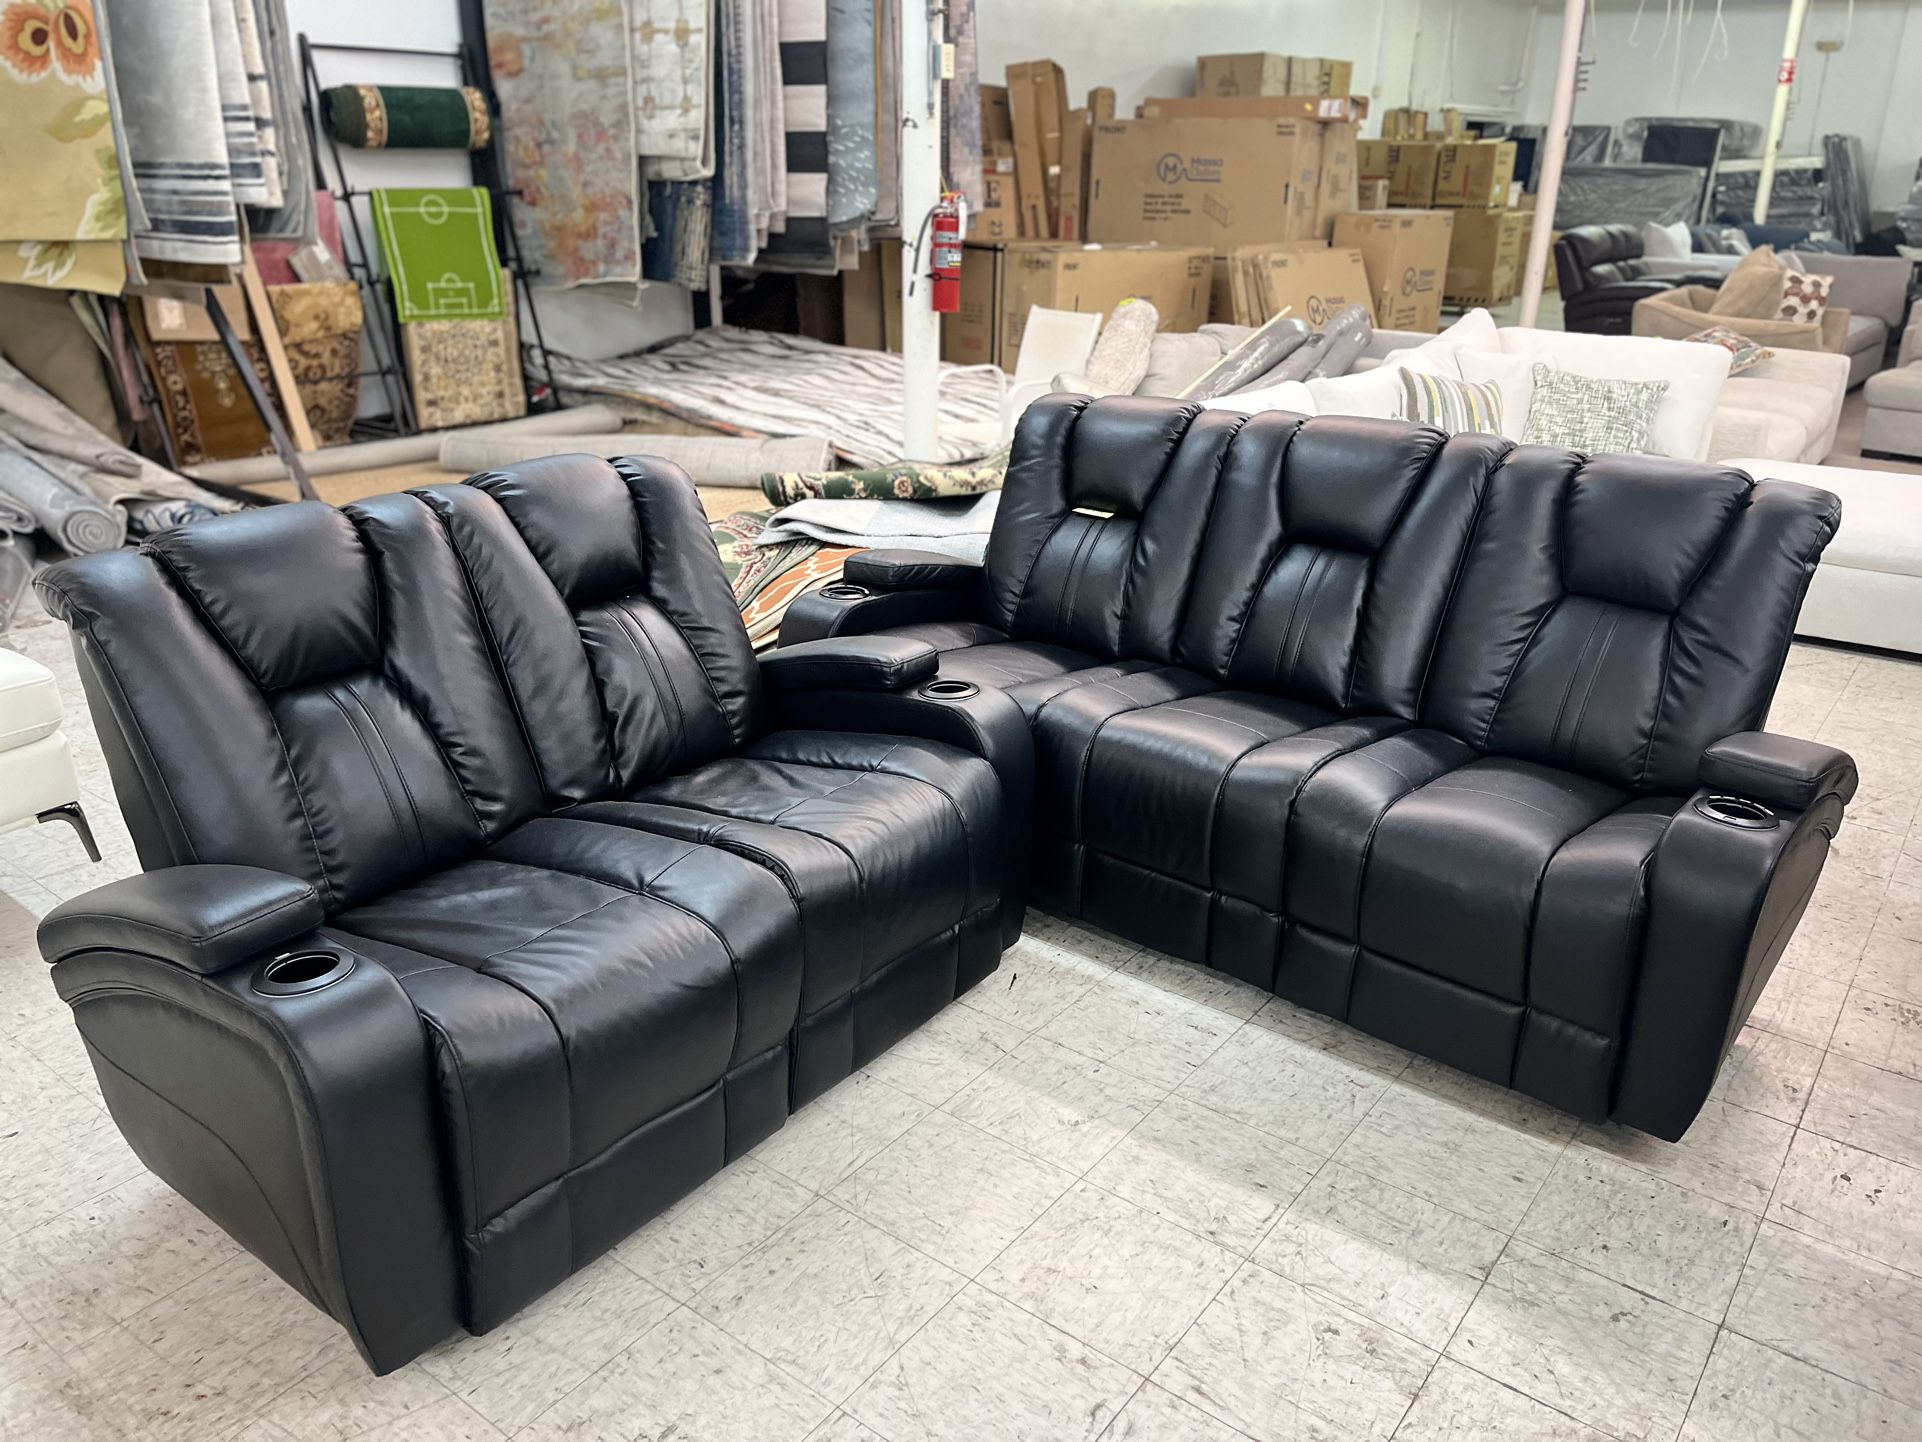 Black Leather Sofa & Loveseat - Dual Power Recliner - We Deliver & Finance 🚚🔥🎄⭐️